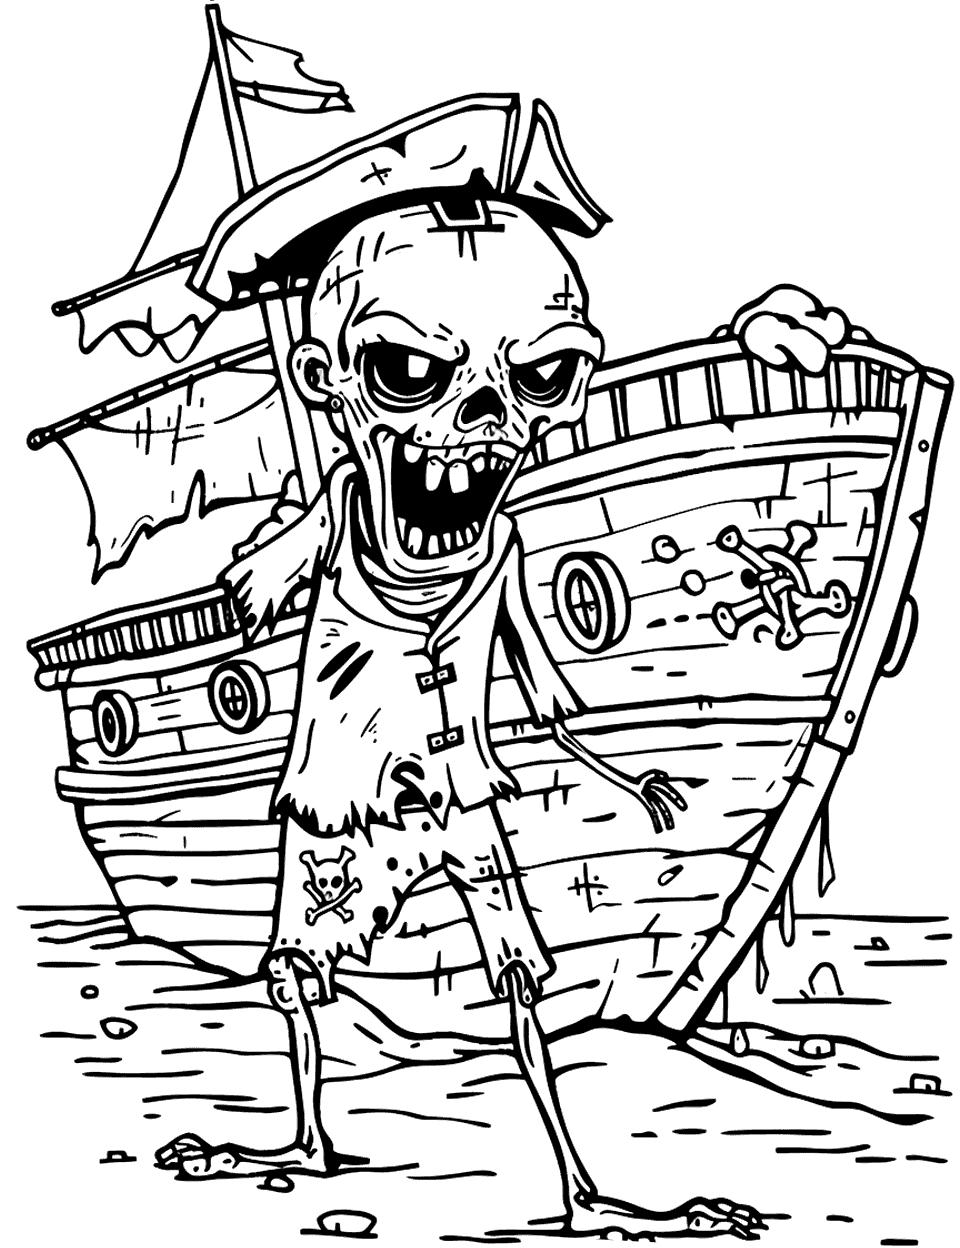 Zombie Pirate's Ship Coloring Page - A zombie pirate in front of its zombie pirate ship.